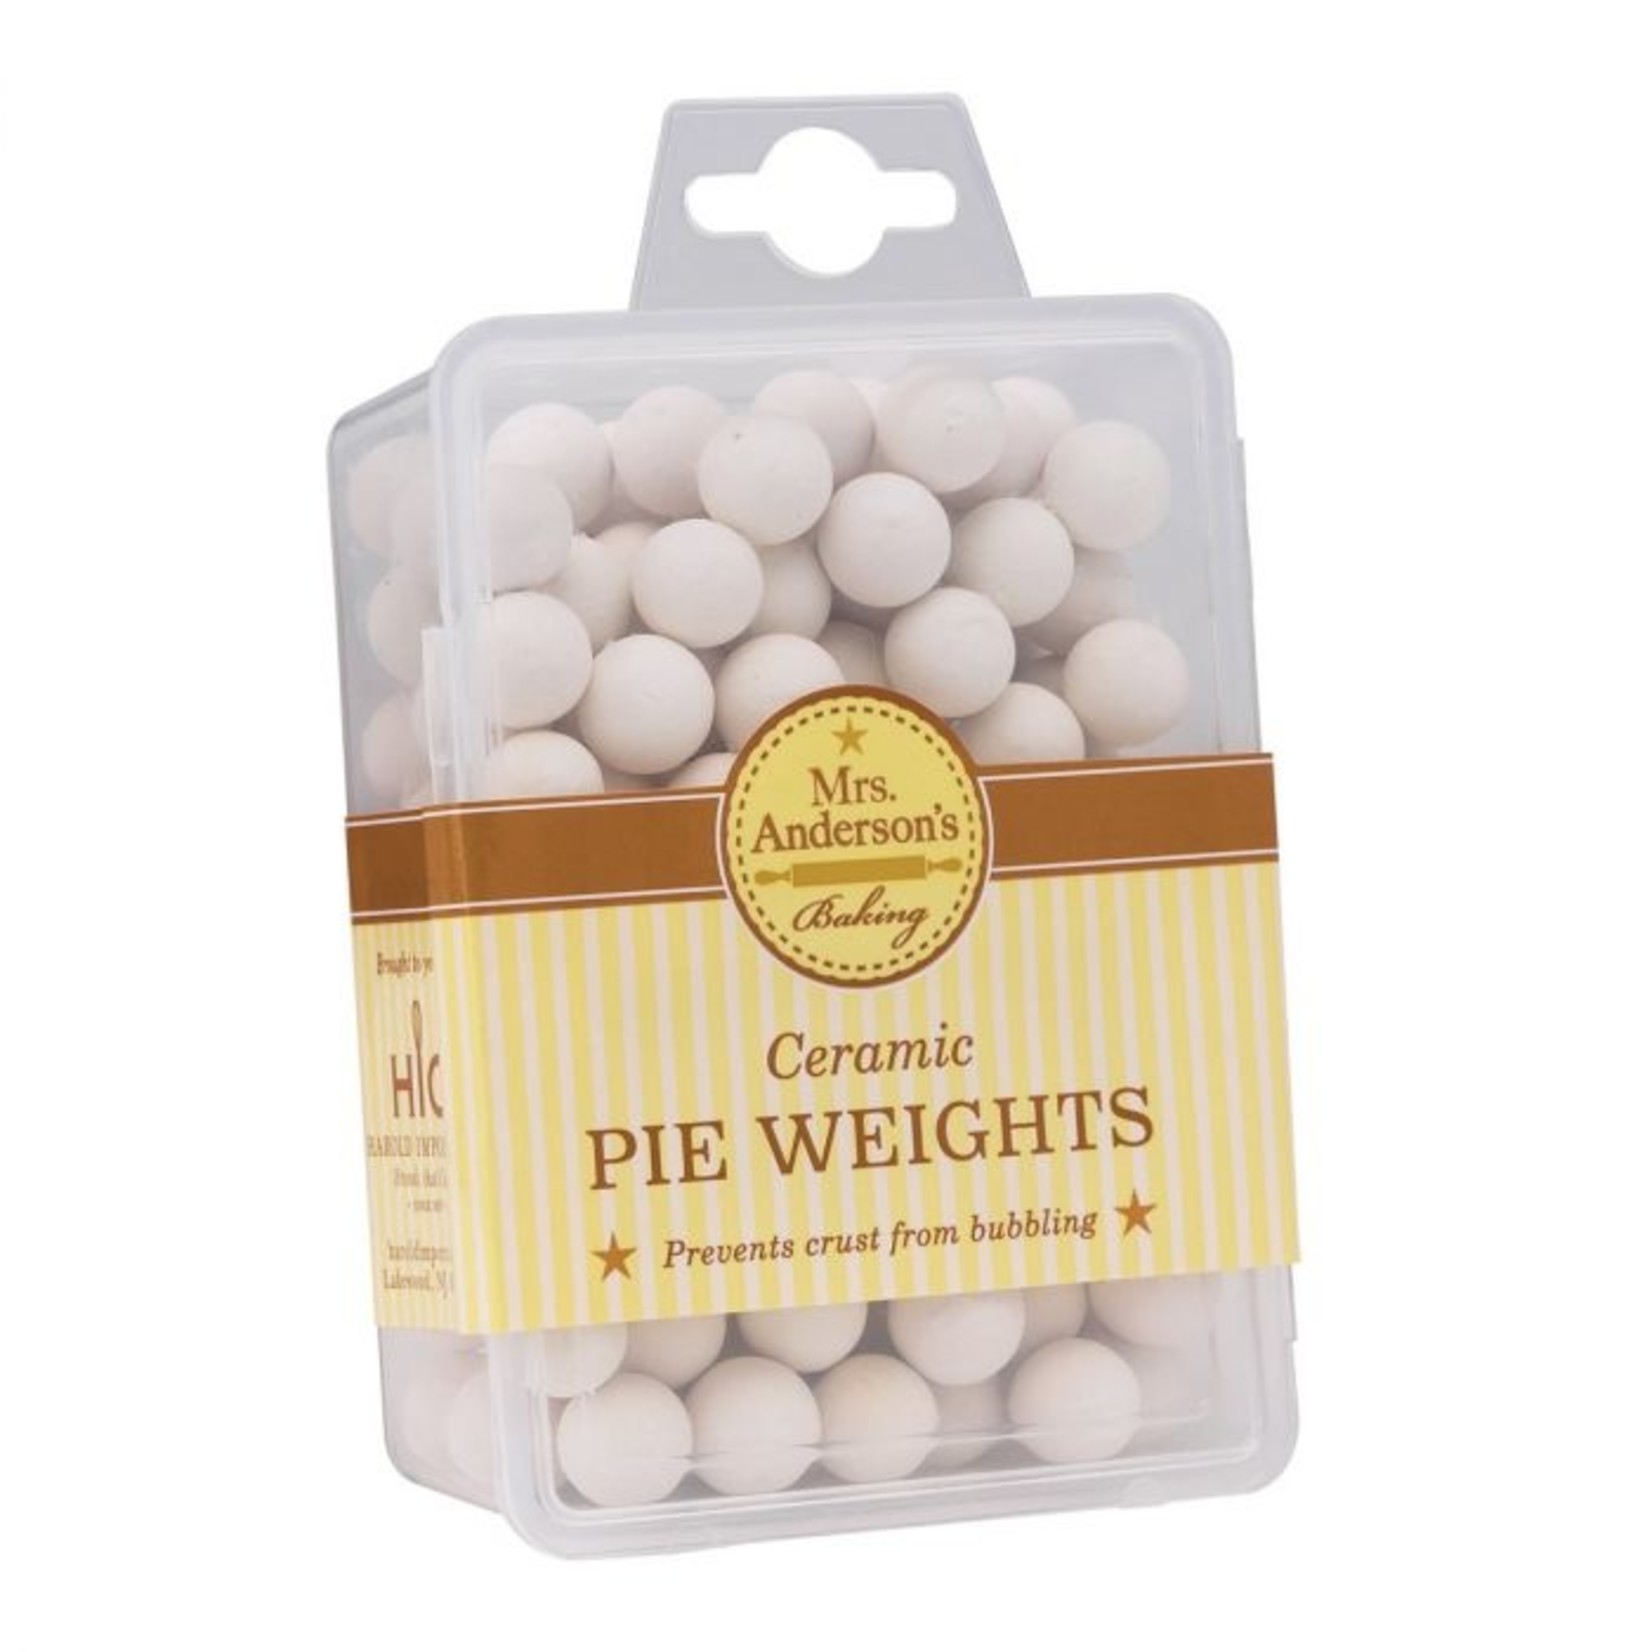 HIC Harold Import Co Mrs. Anderson's Baking Ceramic Pie Weights, 1.5 Lbs.